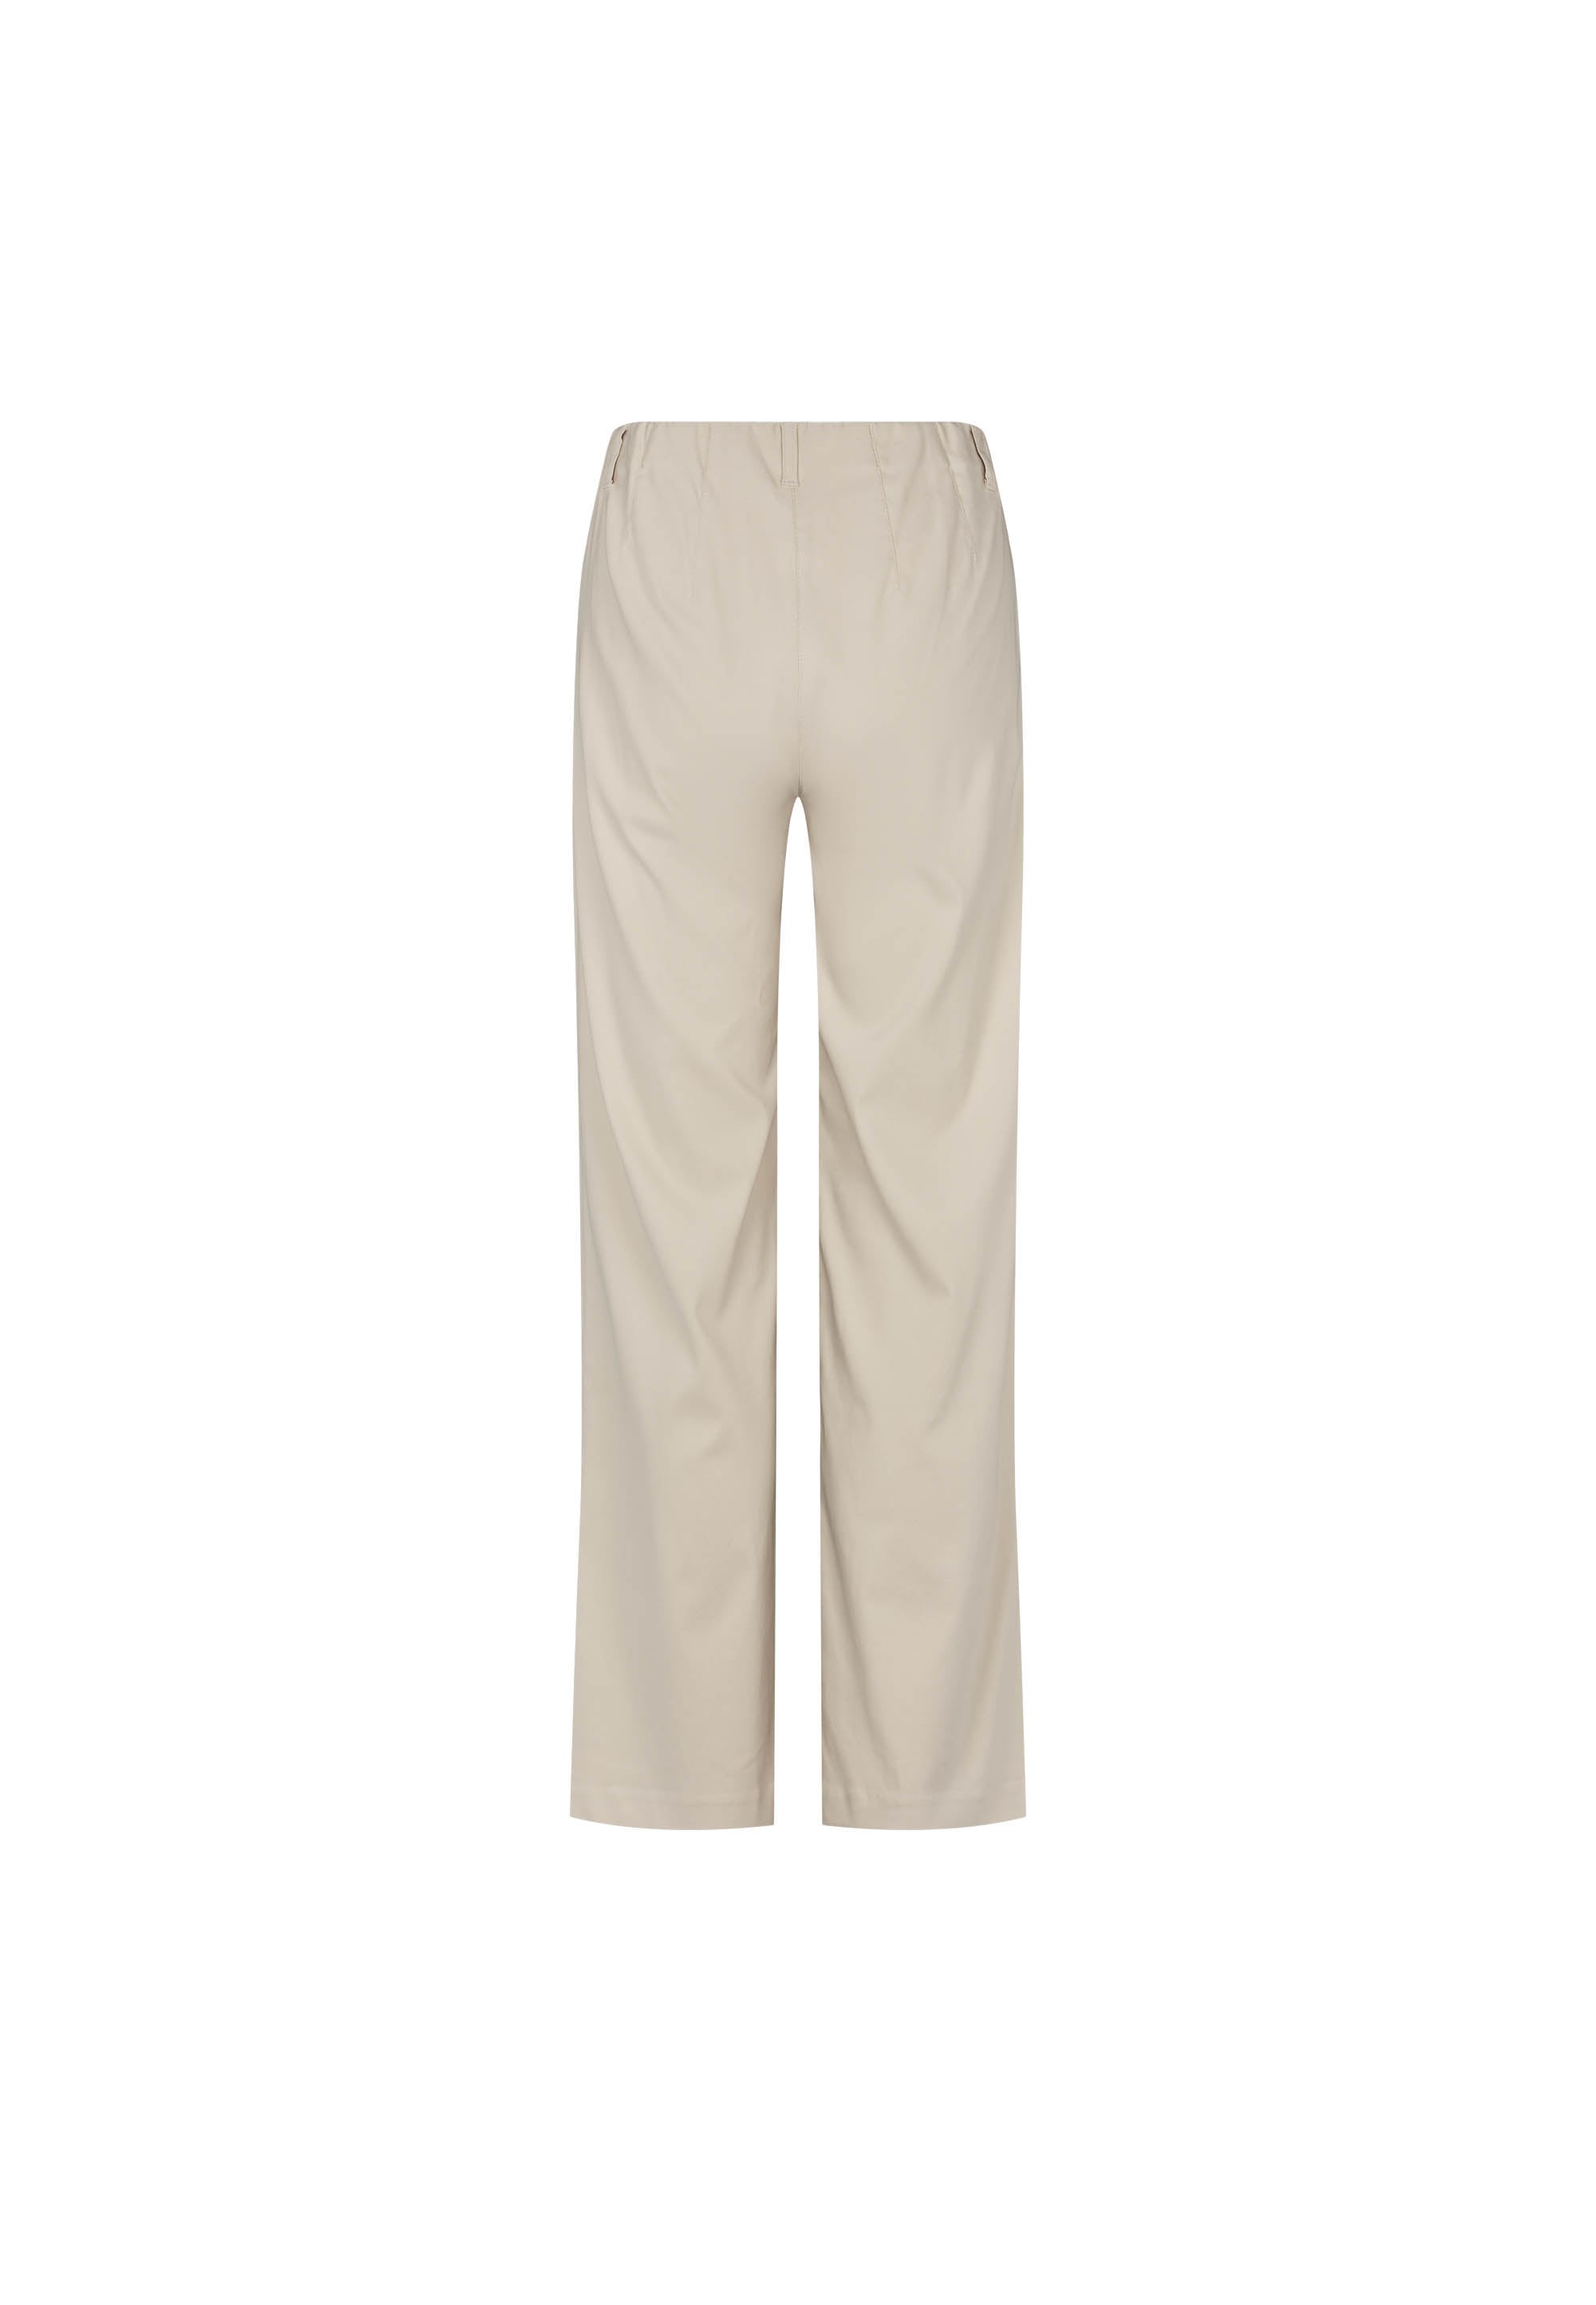 LAURIE Donna Loose - Medium Length Trousers LOOSE 25000 Grey Sand